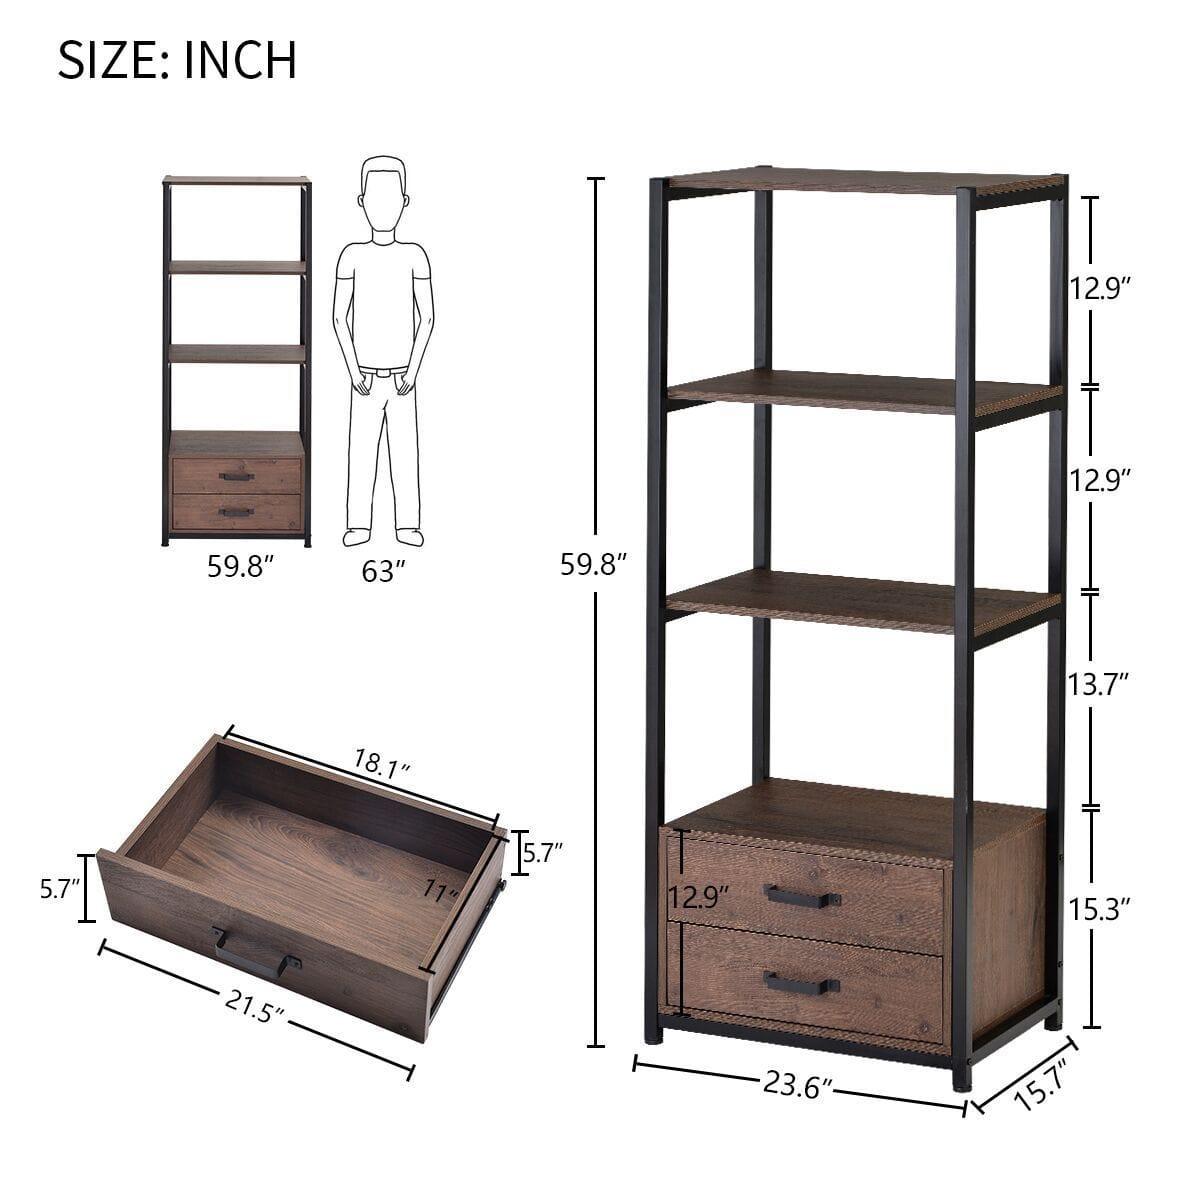 Shop Home Office 4-Tier Bookshelf, Simple Industrial Bookcase Standing Shelf Unit Storage Organizer with 4 Open Storage Shelves and Two Drawers, Brown Mademoiselle Home Decor